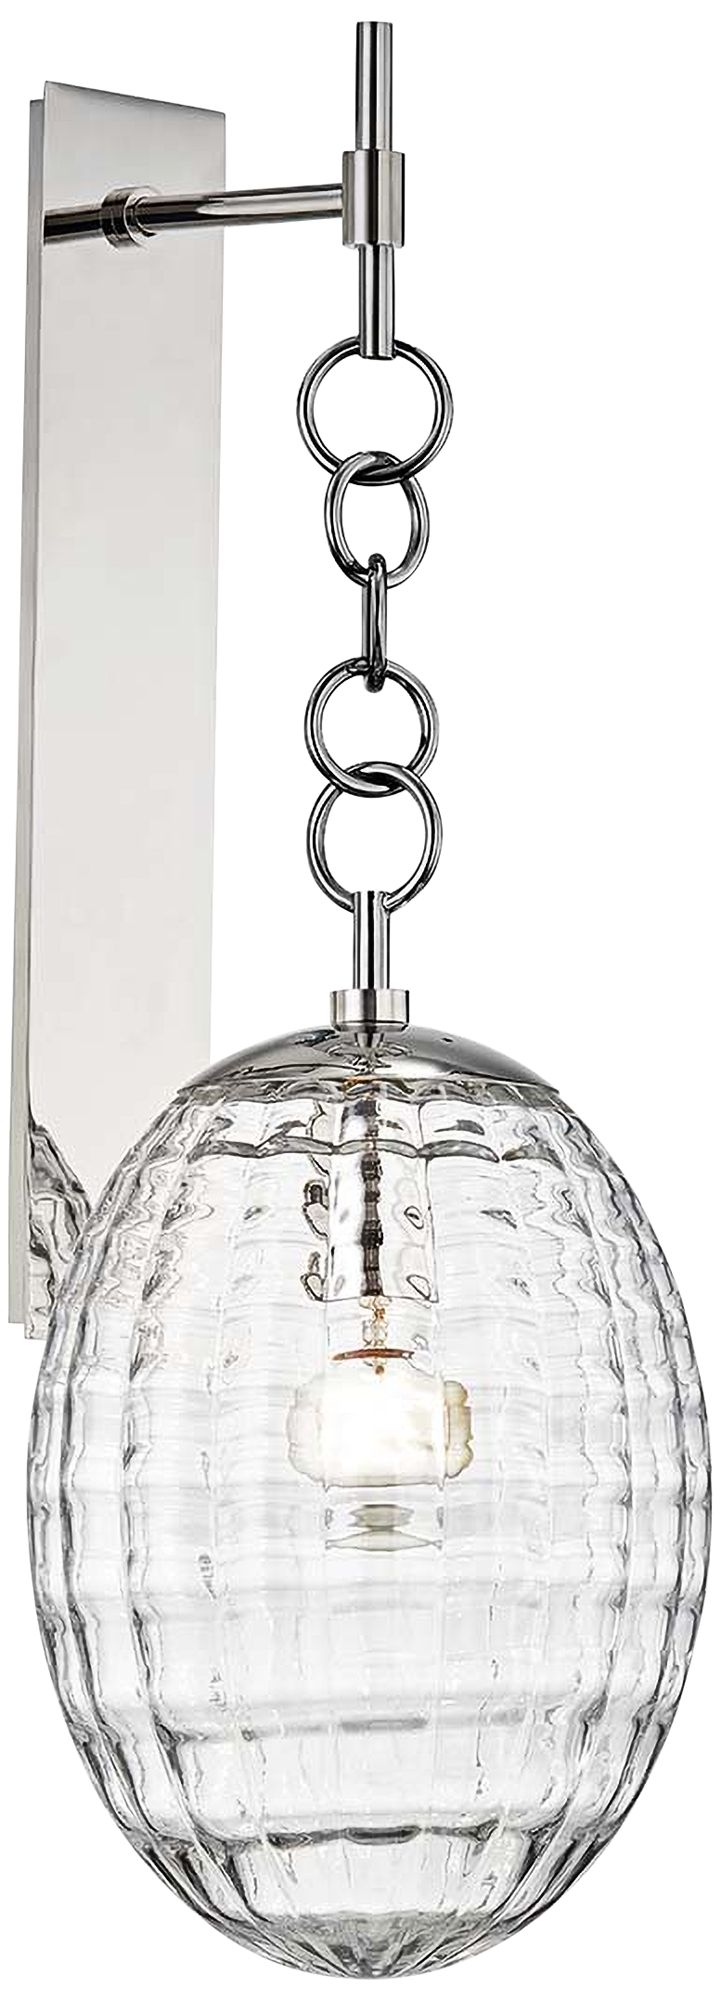 Hudson Valley Venice 24" High Polished Nickel Wall Sconce